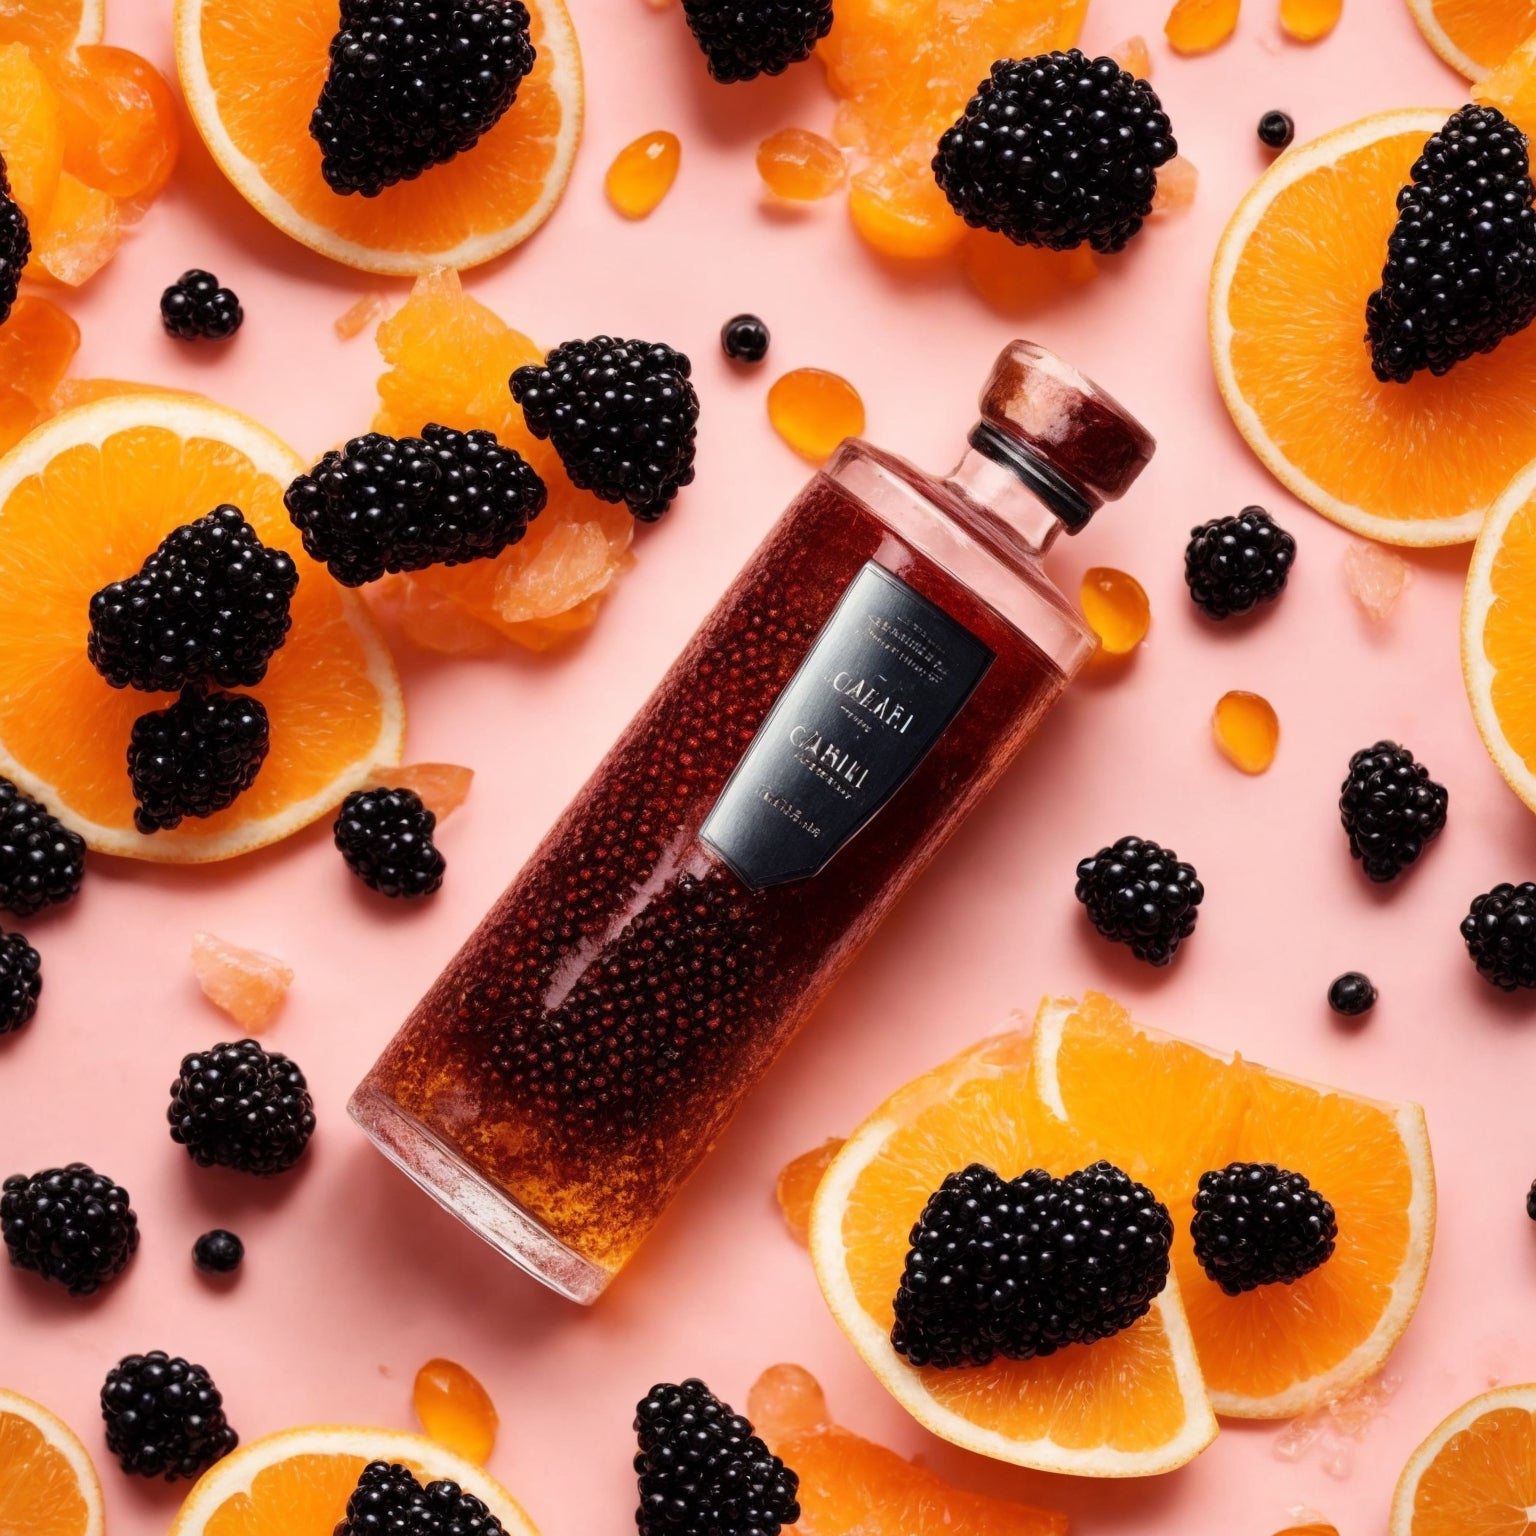 Caviar Craze: The Hottest Trends in Cocktail Mixology